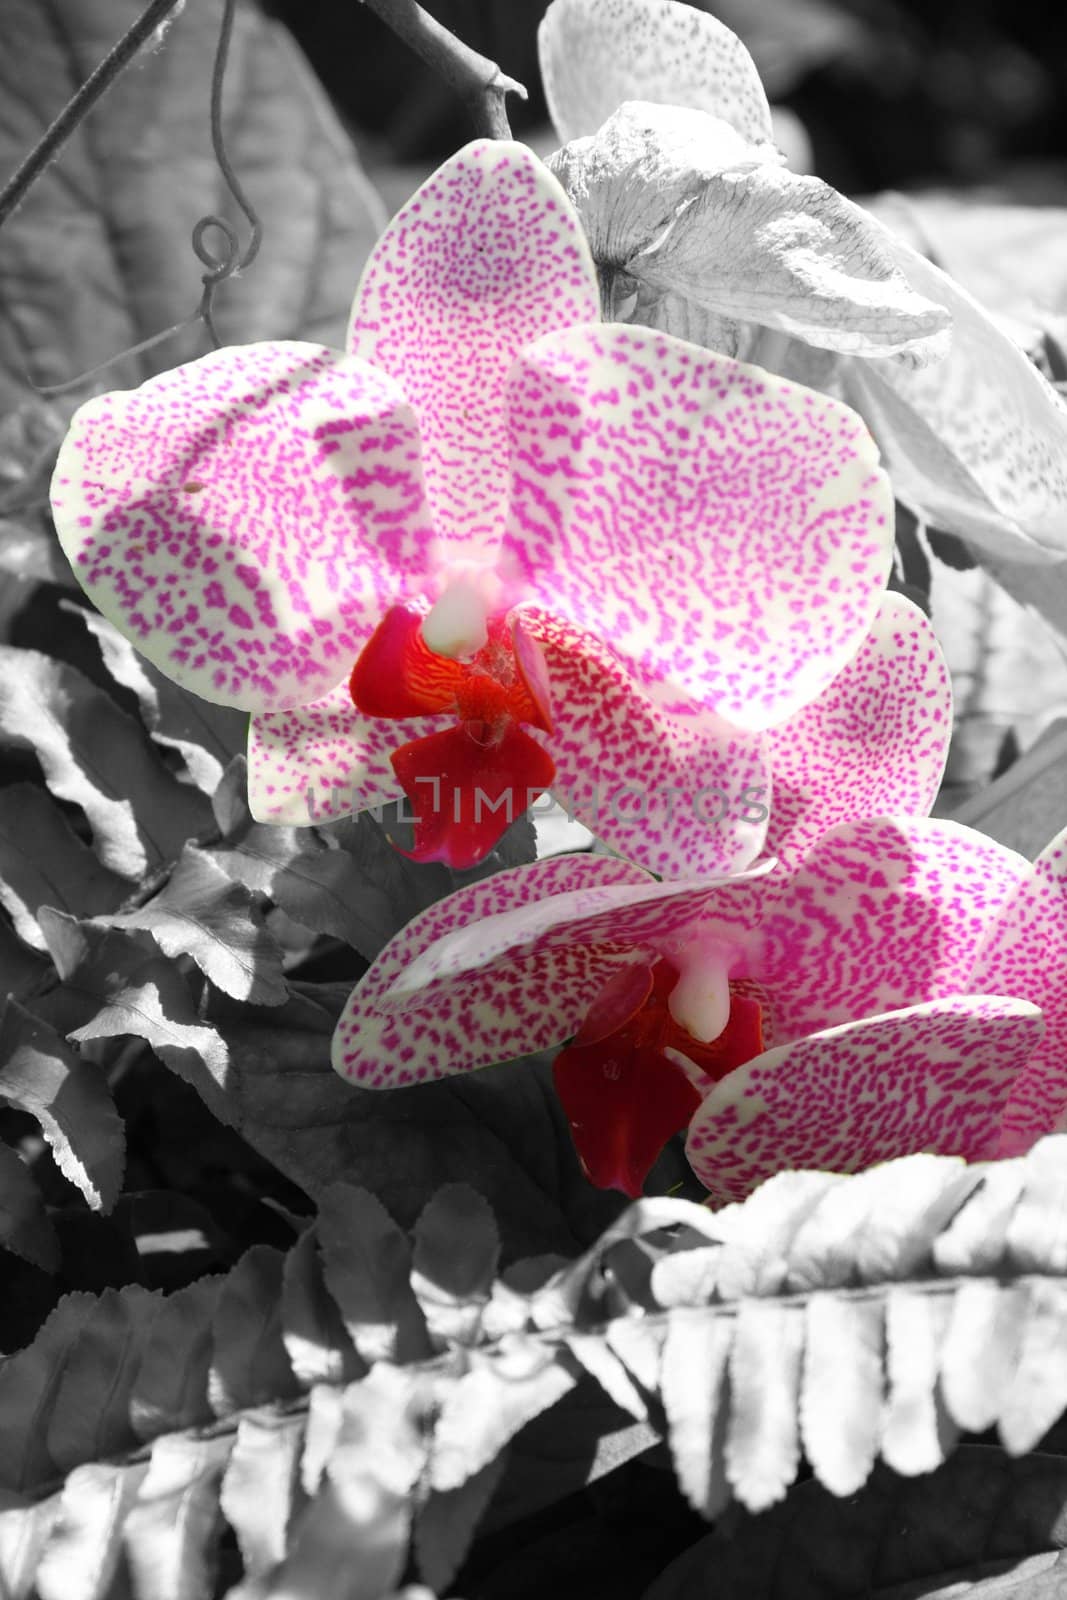 Flowers selectivly colored from a black and white background.